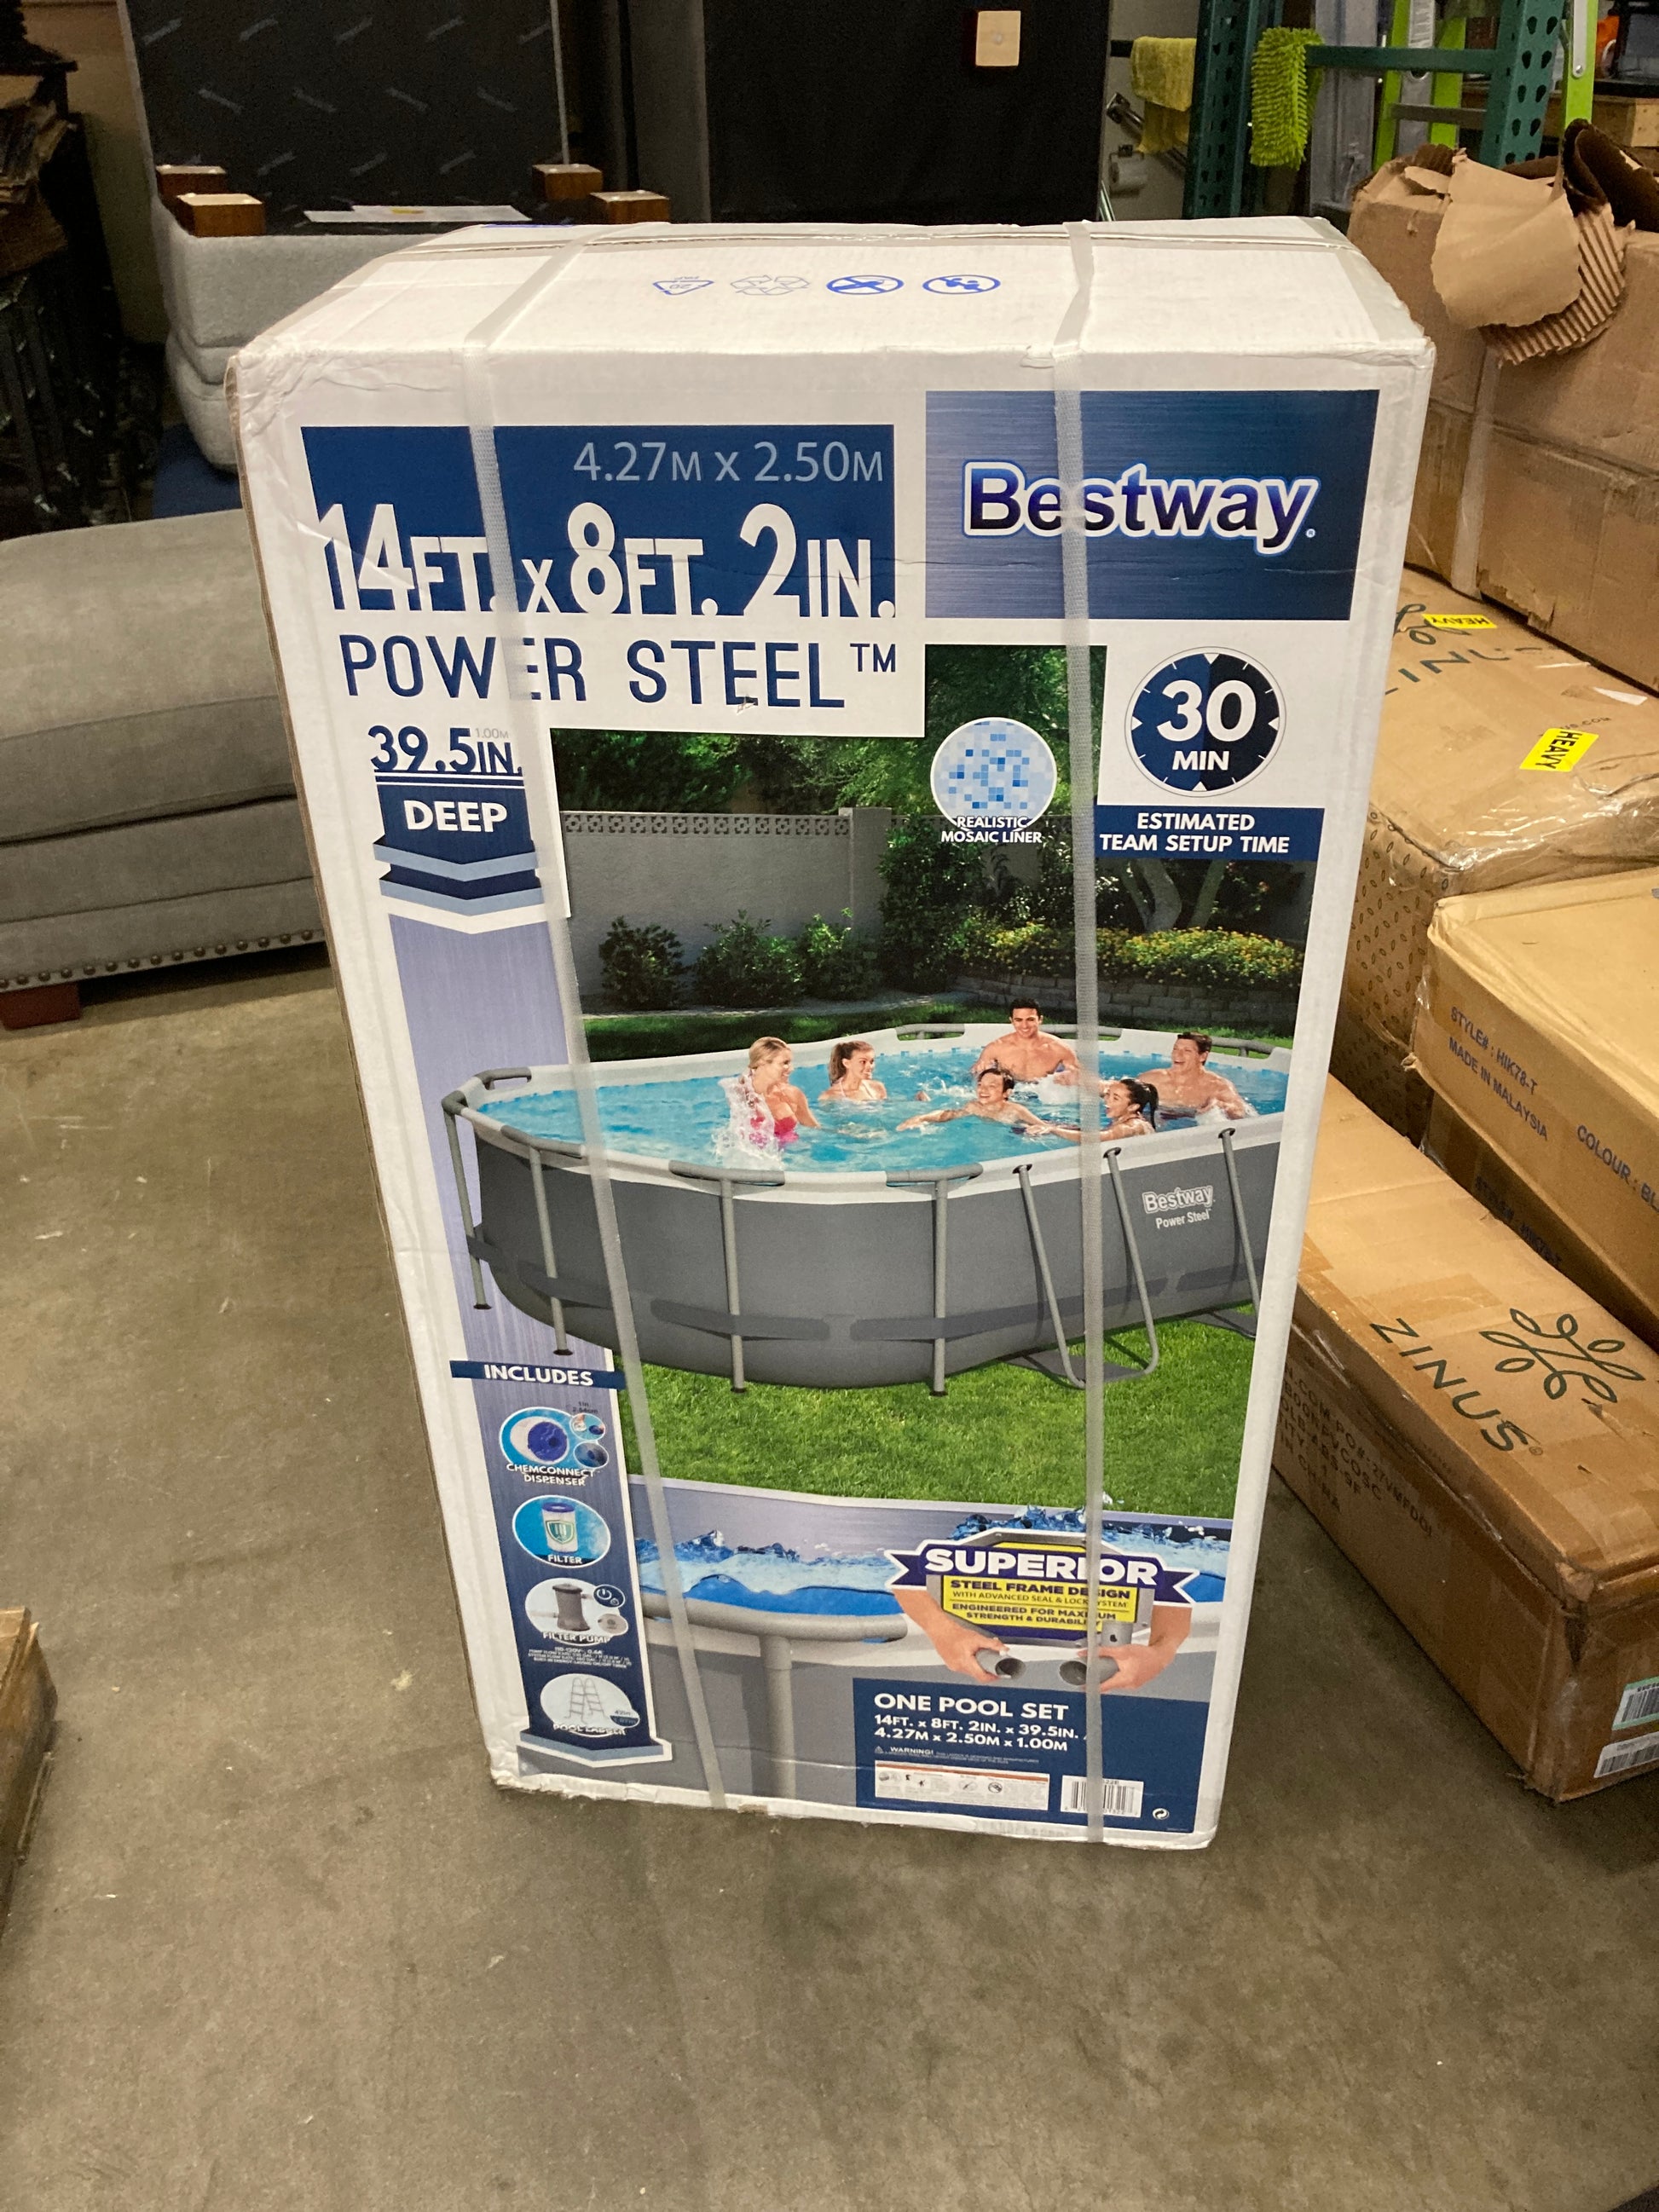 Bestway Power Steel 14' x 8'2" x 39.5" Oval Above Ground Pool Set | Includes 530gal Filter Pump, Ladder, ChemConnect Dispener Default Title